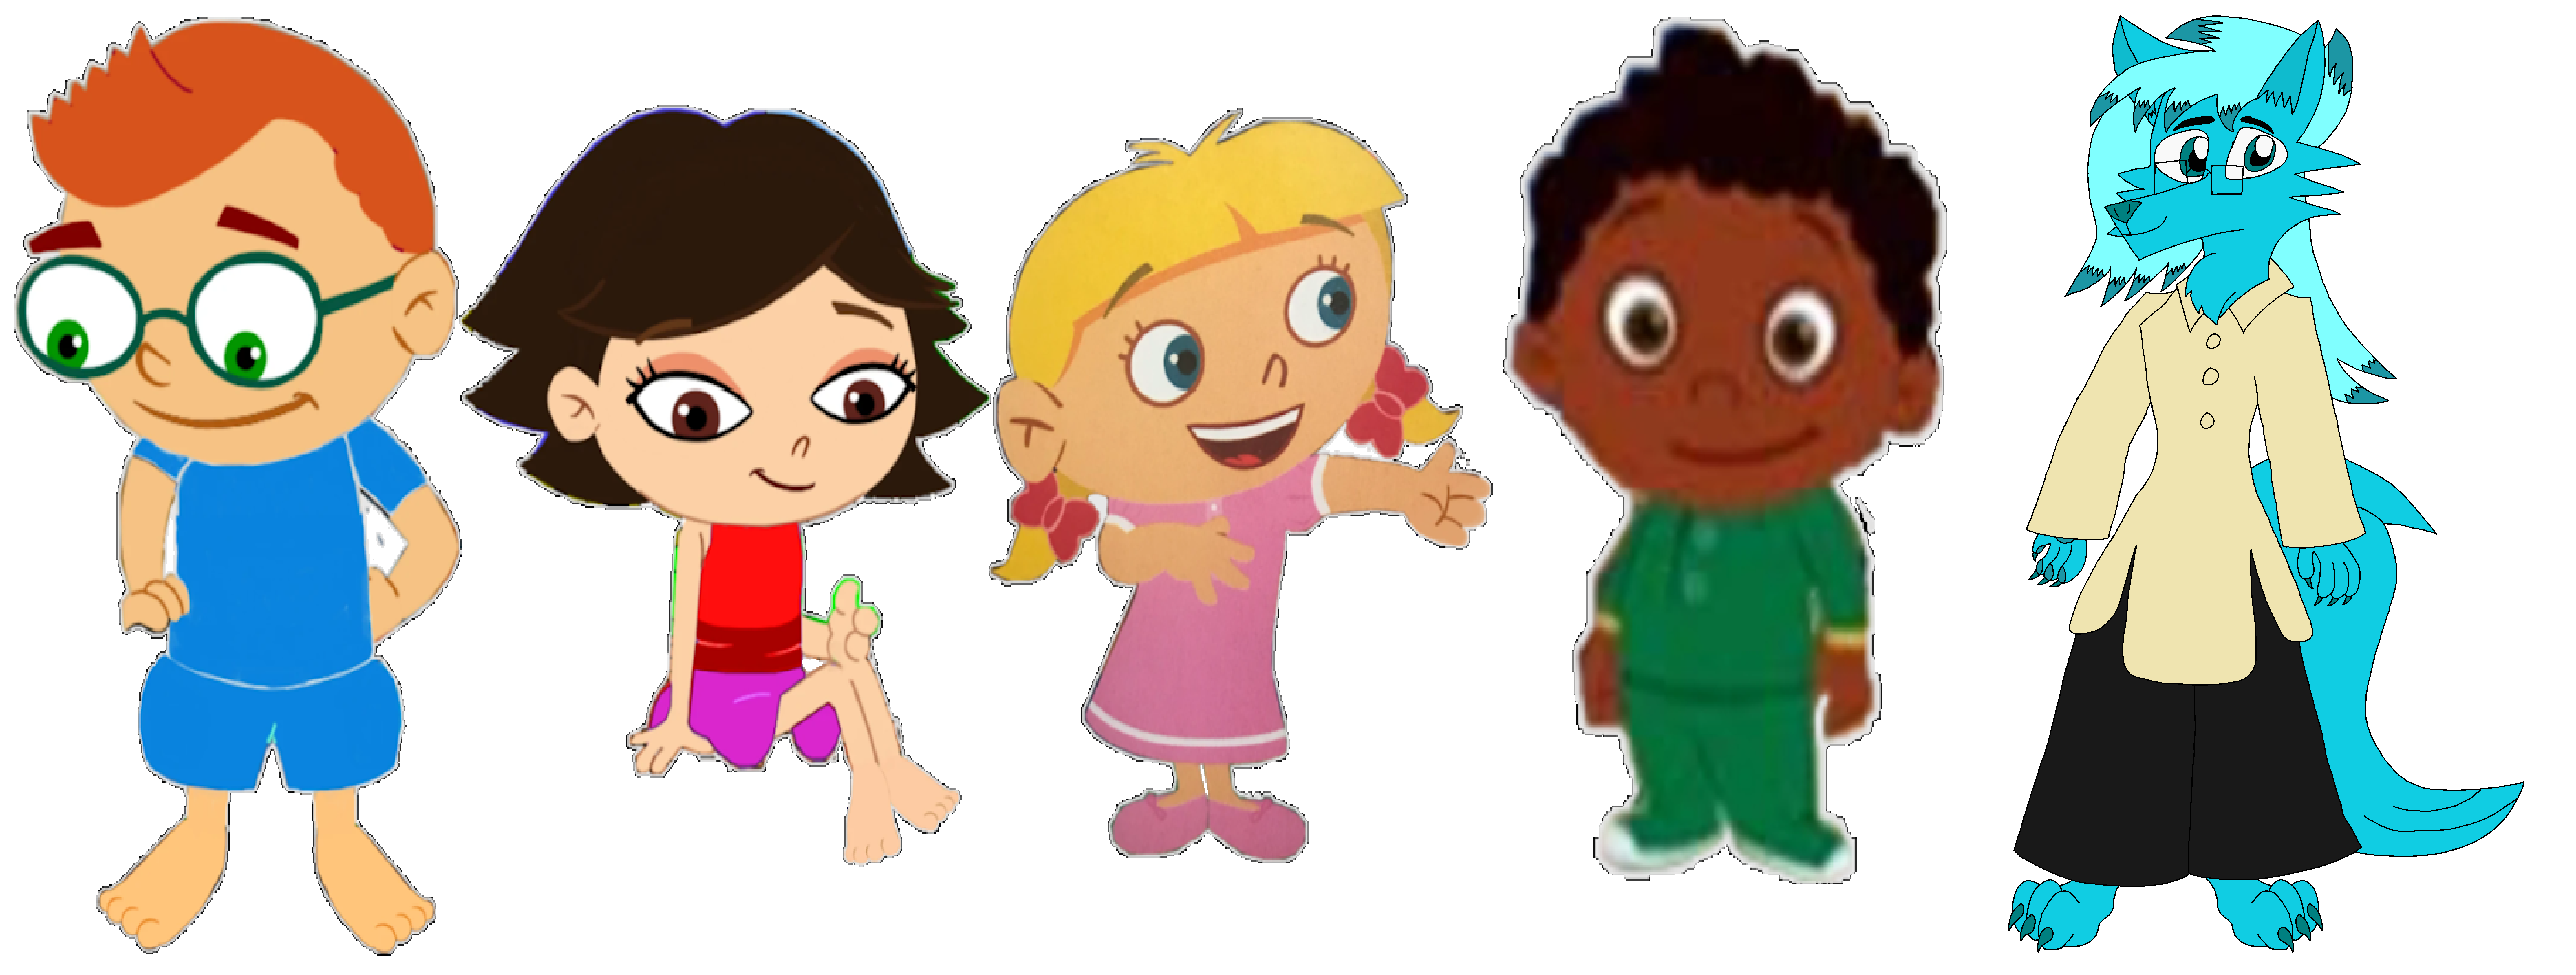 Me And The Little Einsteins In Pajamas 2 by Hubfanlover678 on